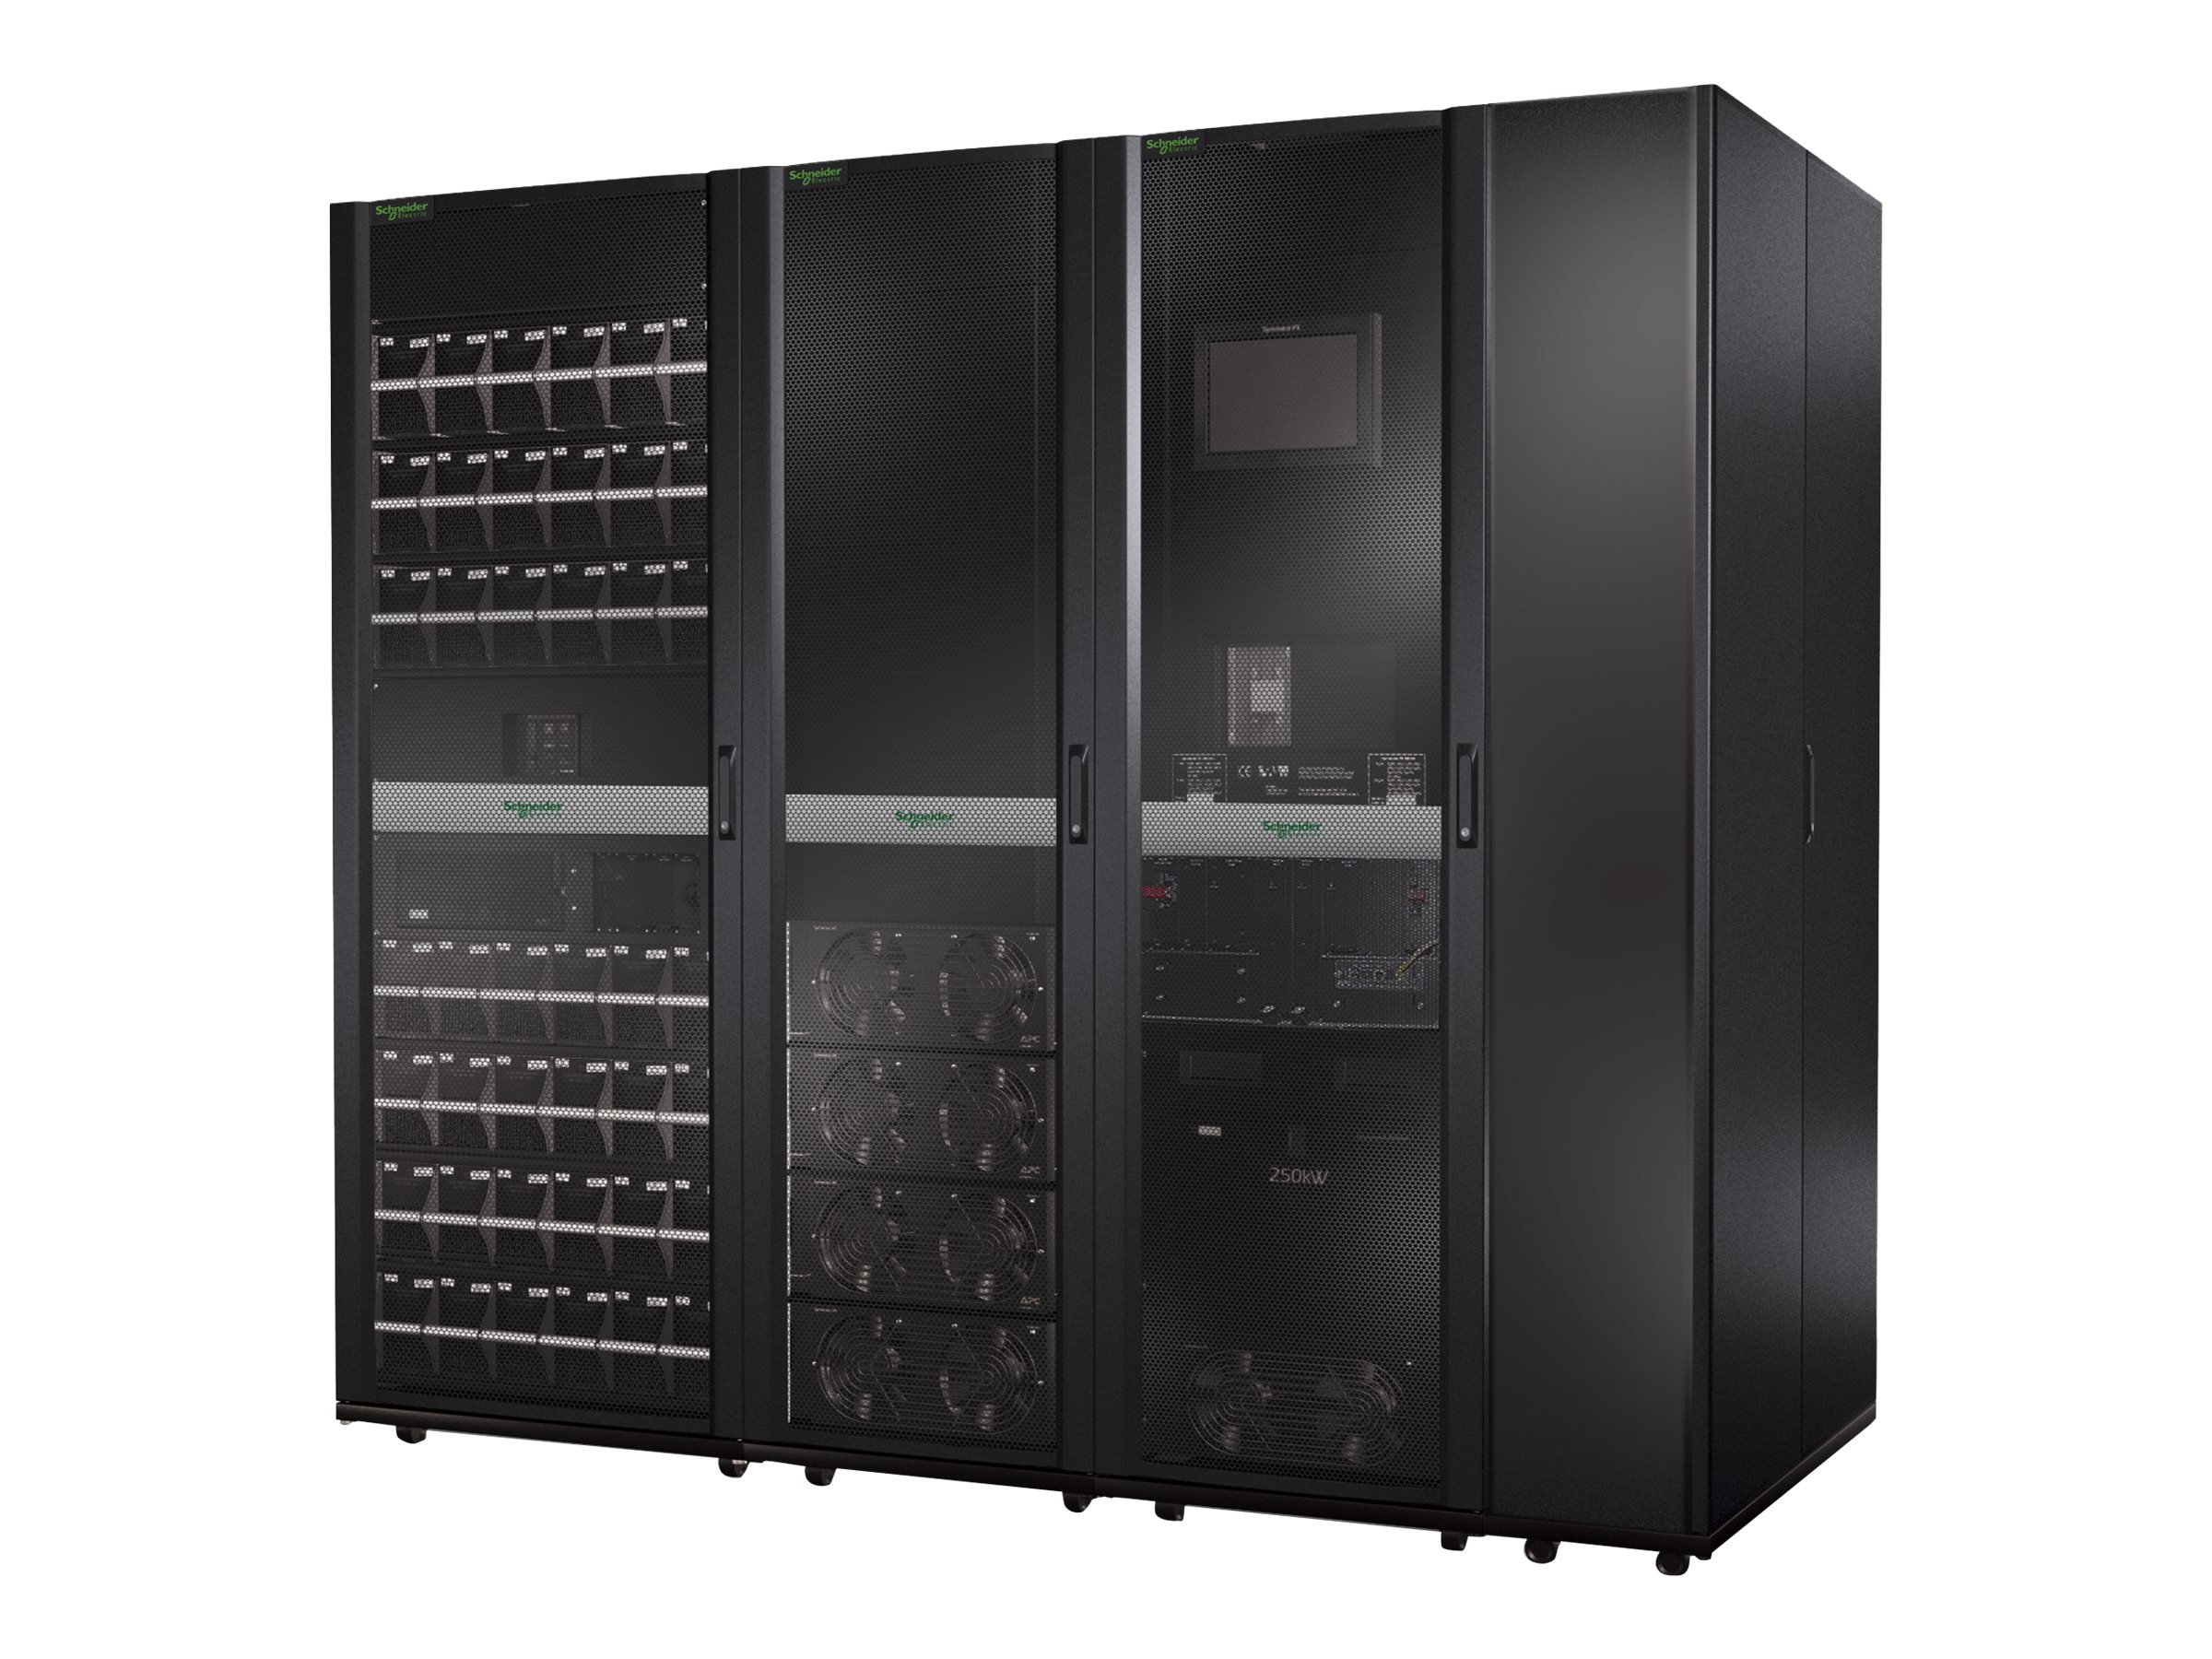 APC Symmetra PX 100kW Scalable to 250kW with Right Mounted Maintenance Bypass and Distribution - Strom - Anordnung - Wechselstro